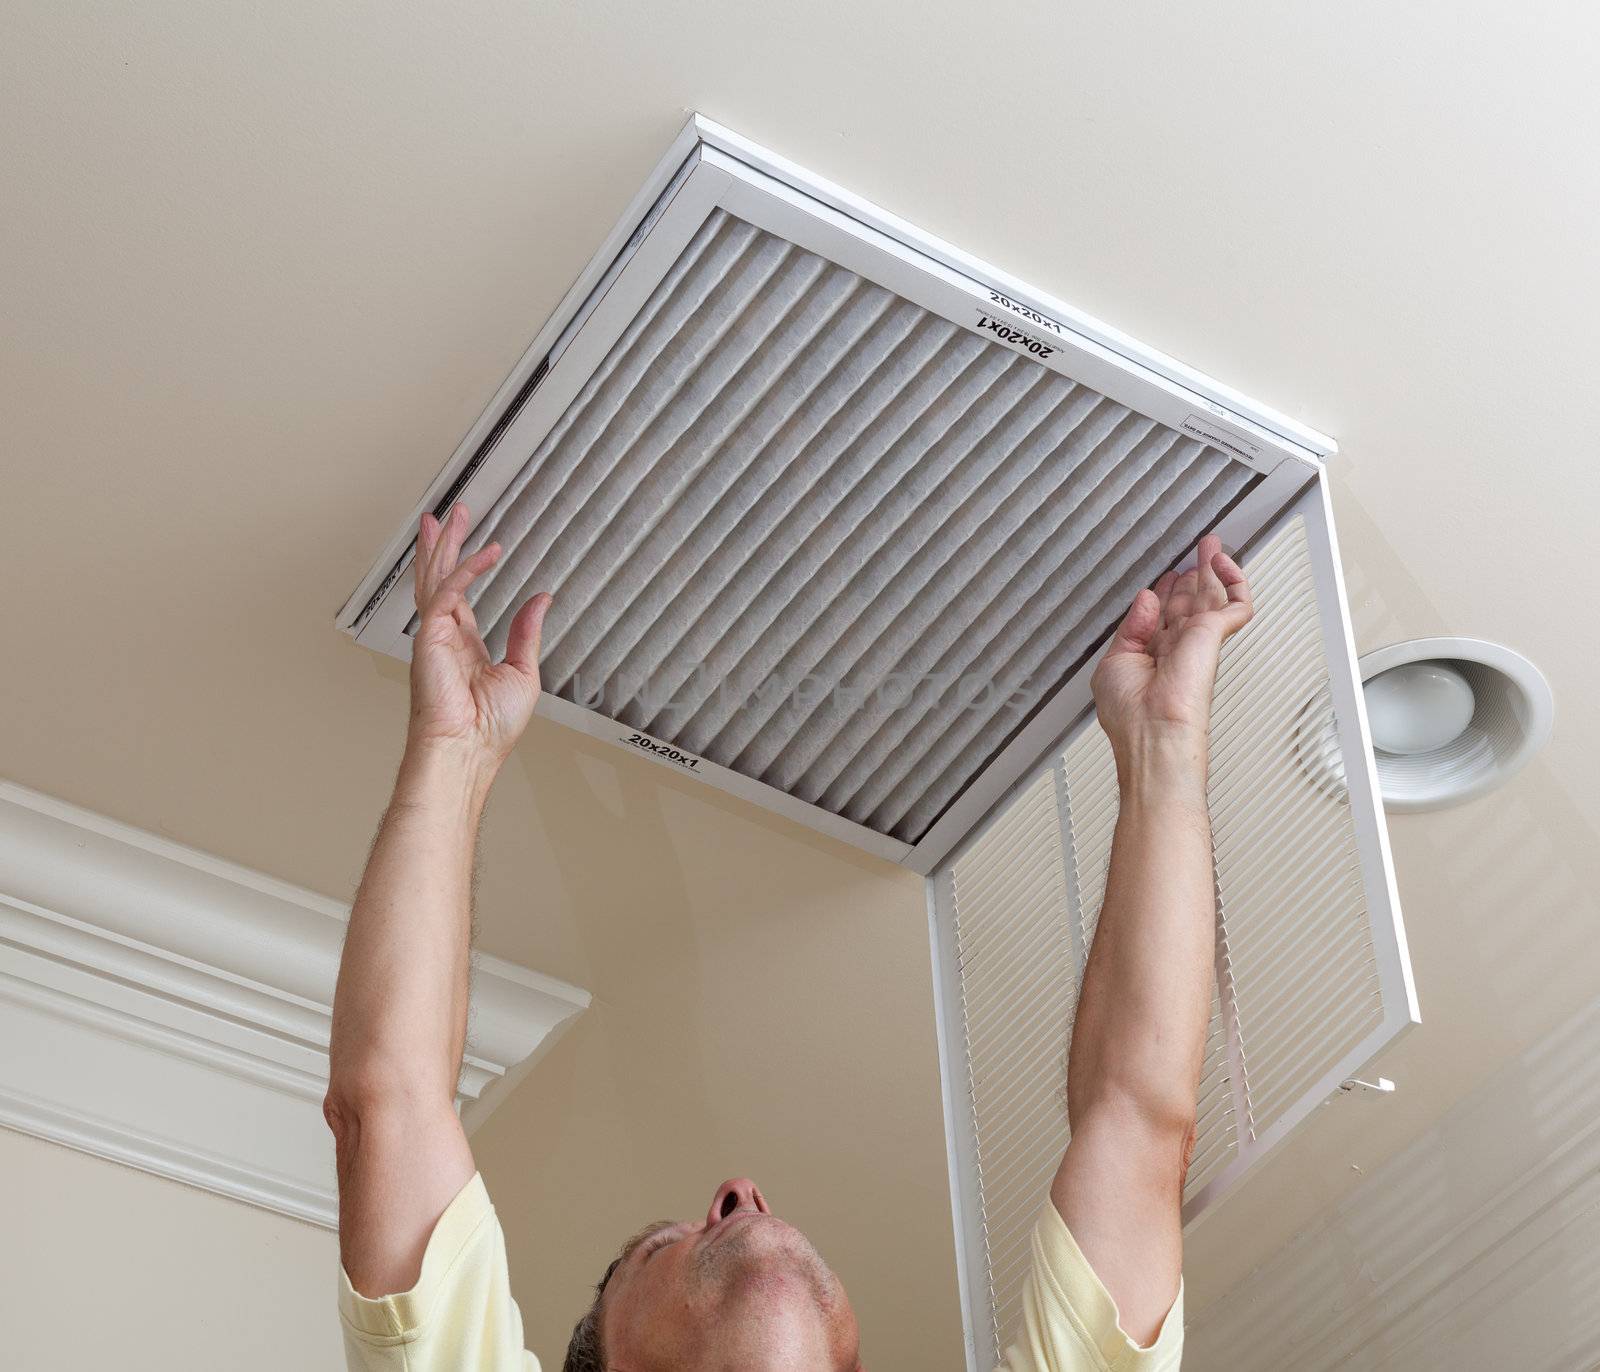 Senior man opening air conditioning filter in ceiling by steheap